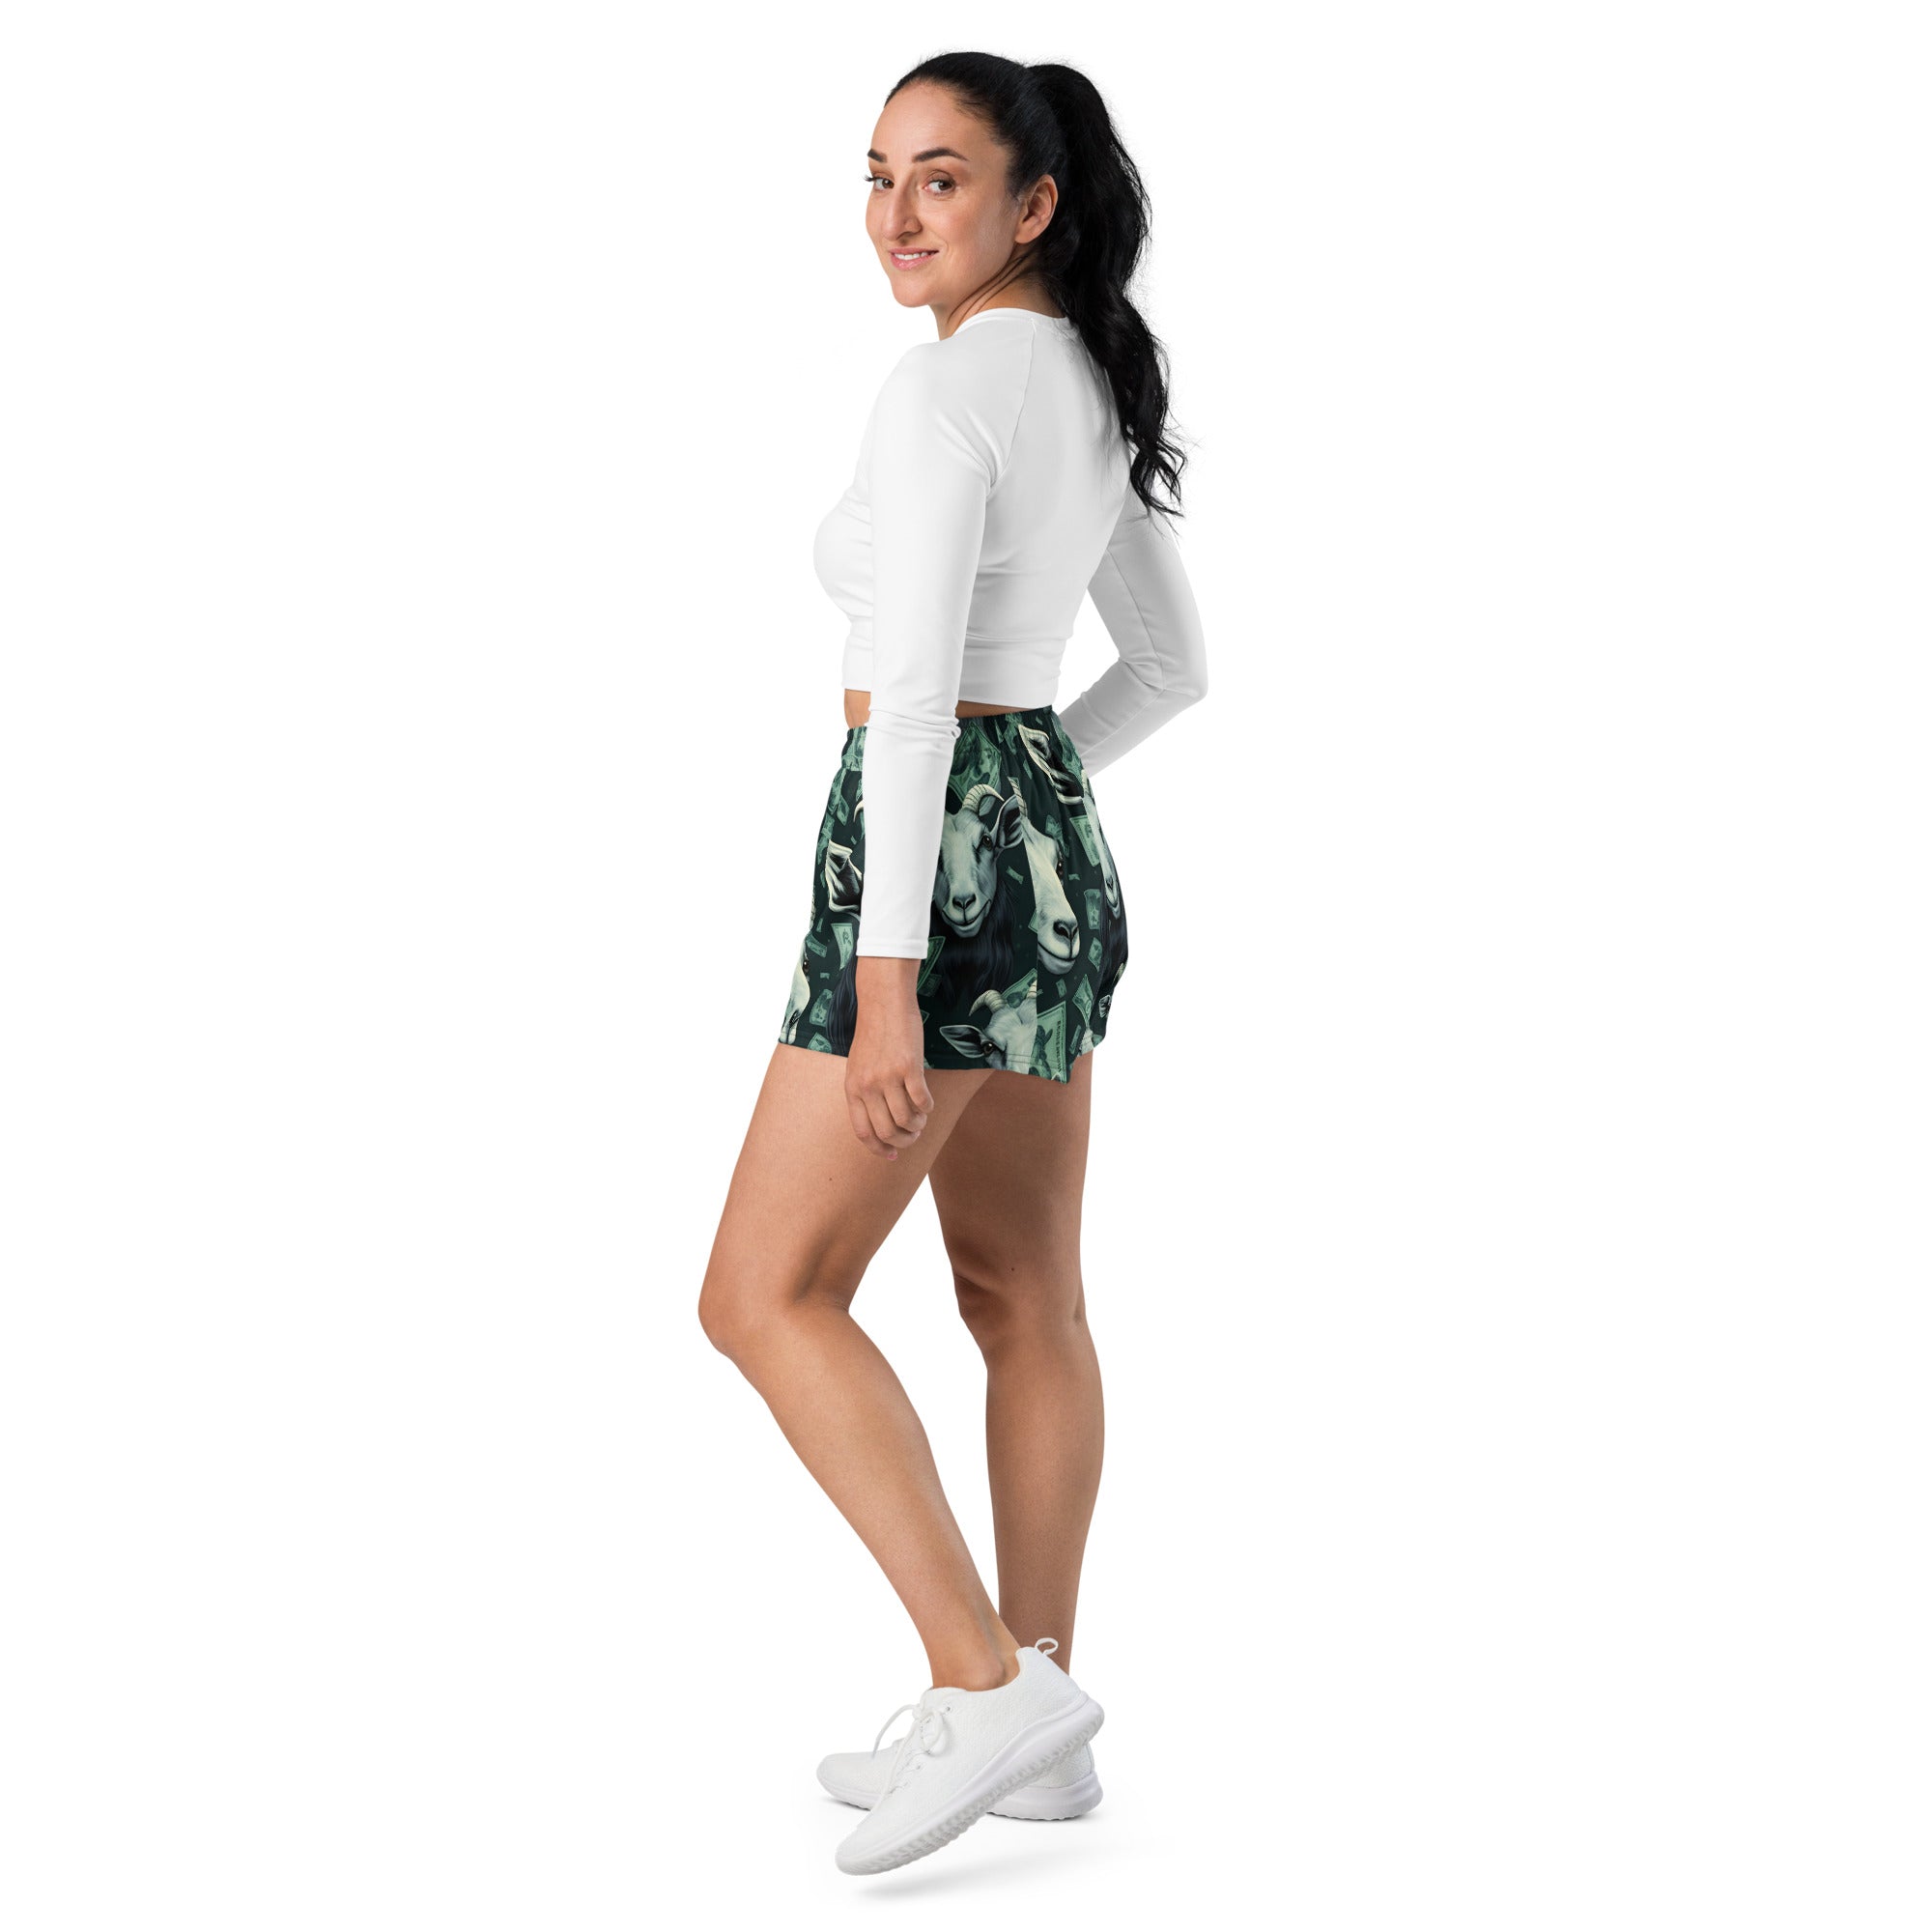 Money and GOATS Women’s Recycled Athletic Shorts